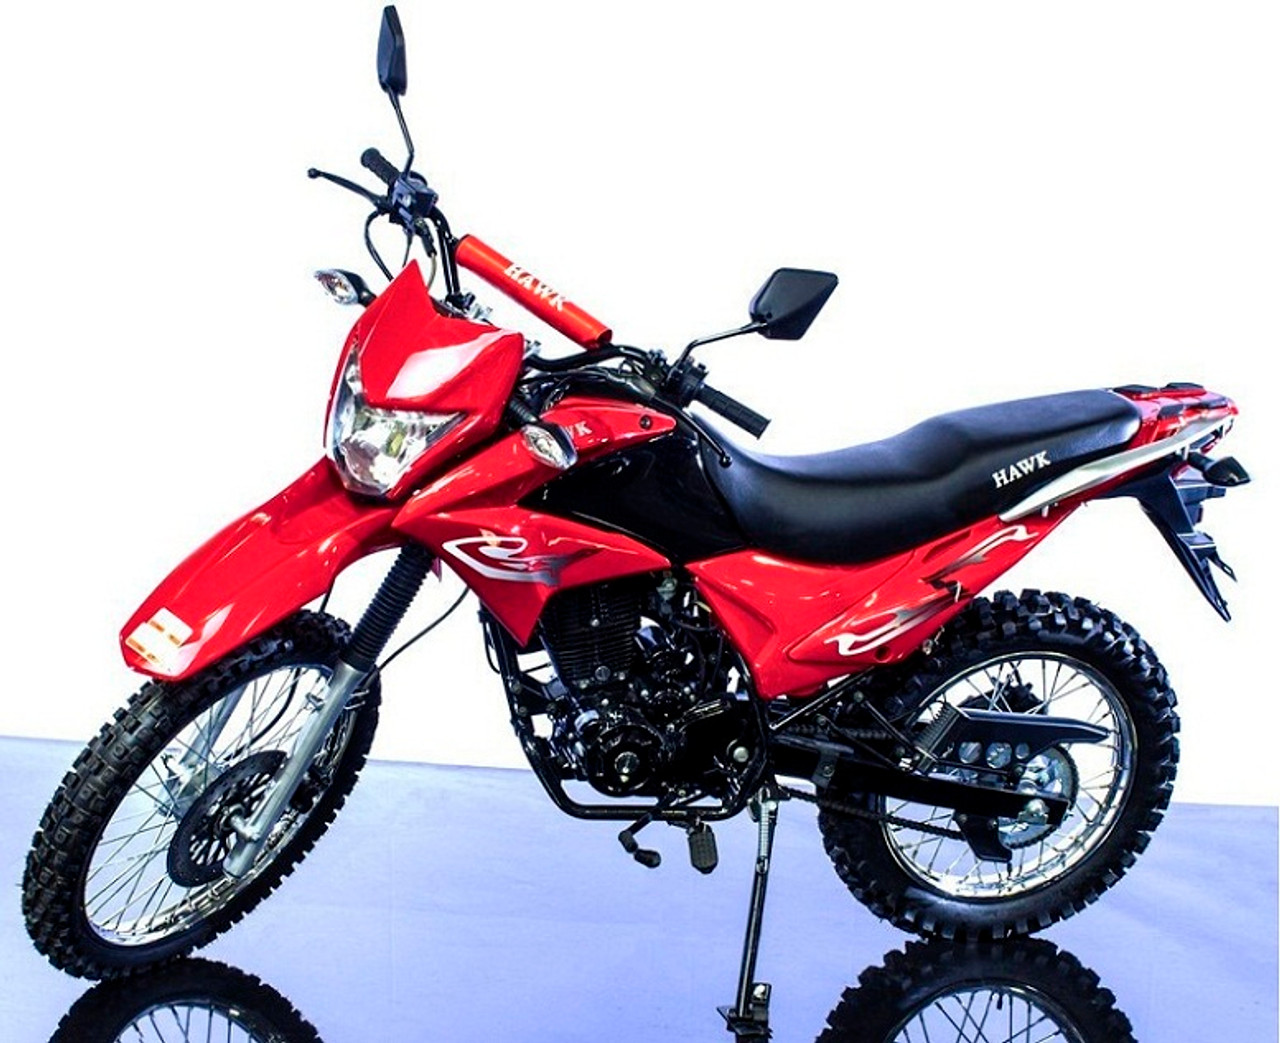 New Hawk 250cc Dirt Bike Dual Sports Enduro Street Legal With Bluetooth Speaker and Phone Holder RED SIDE VIEW